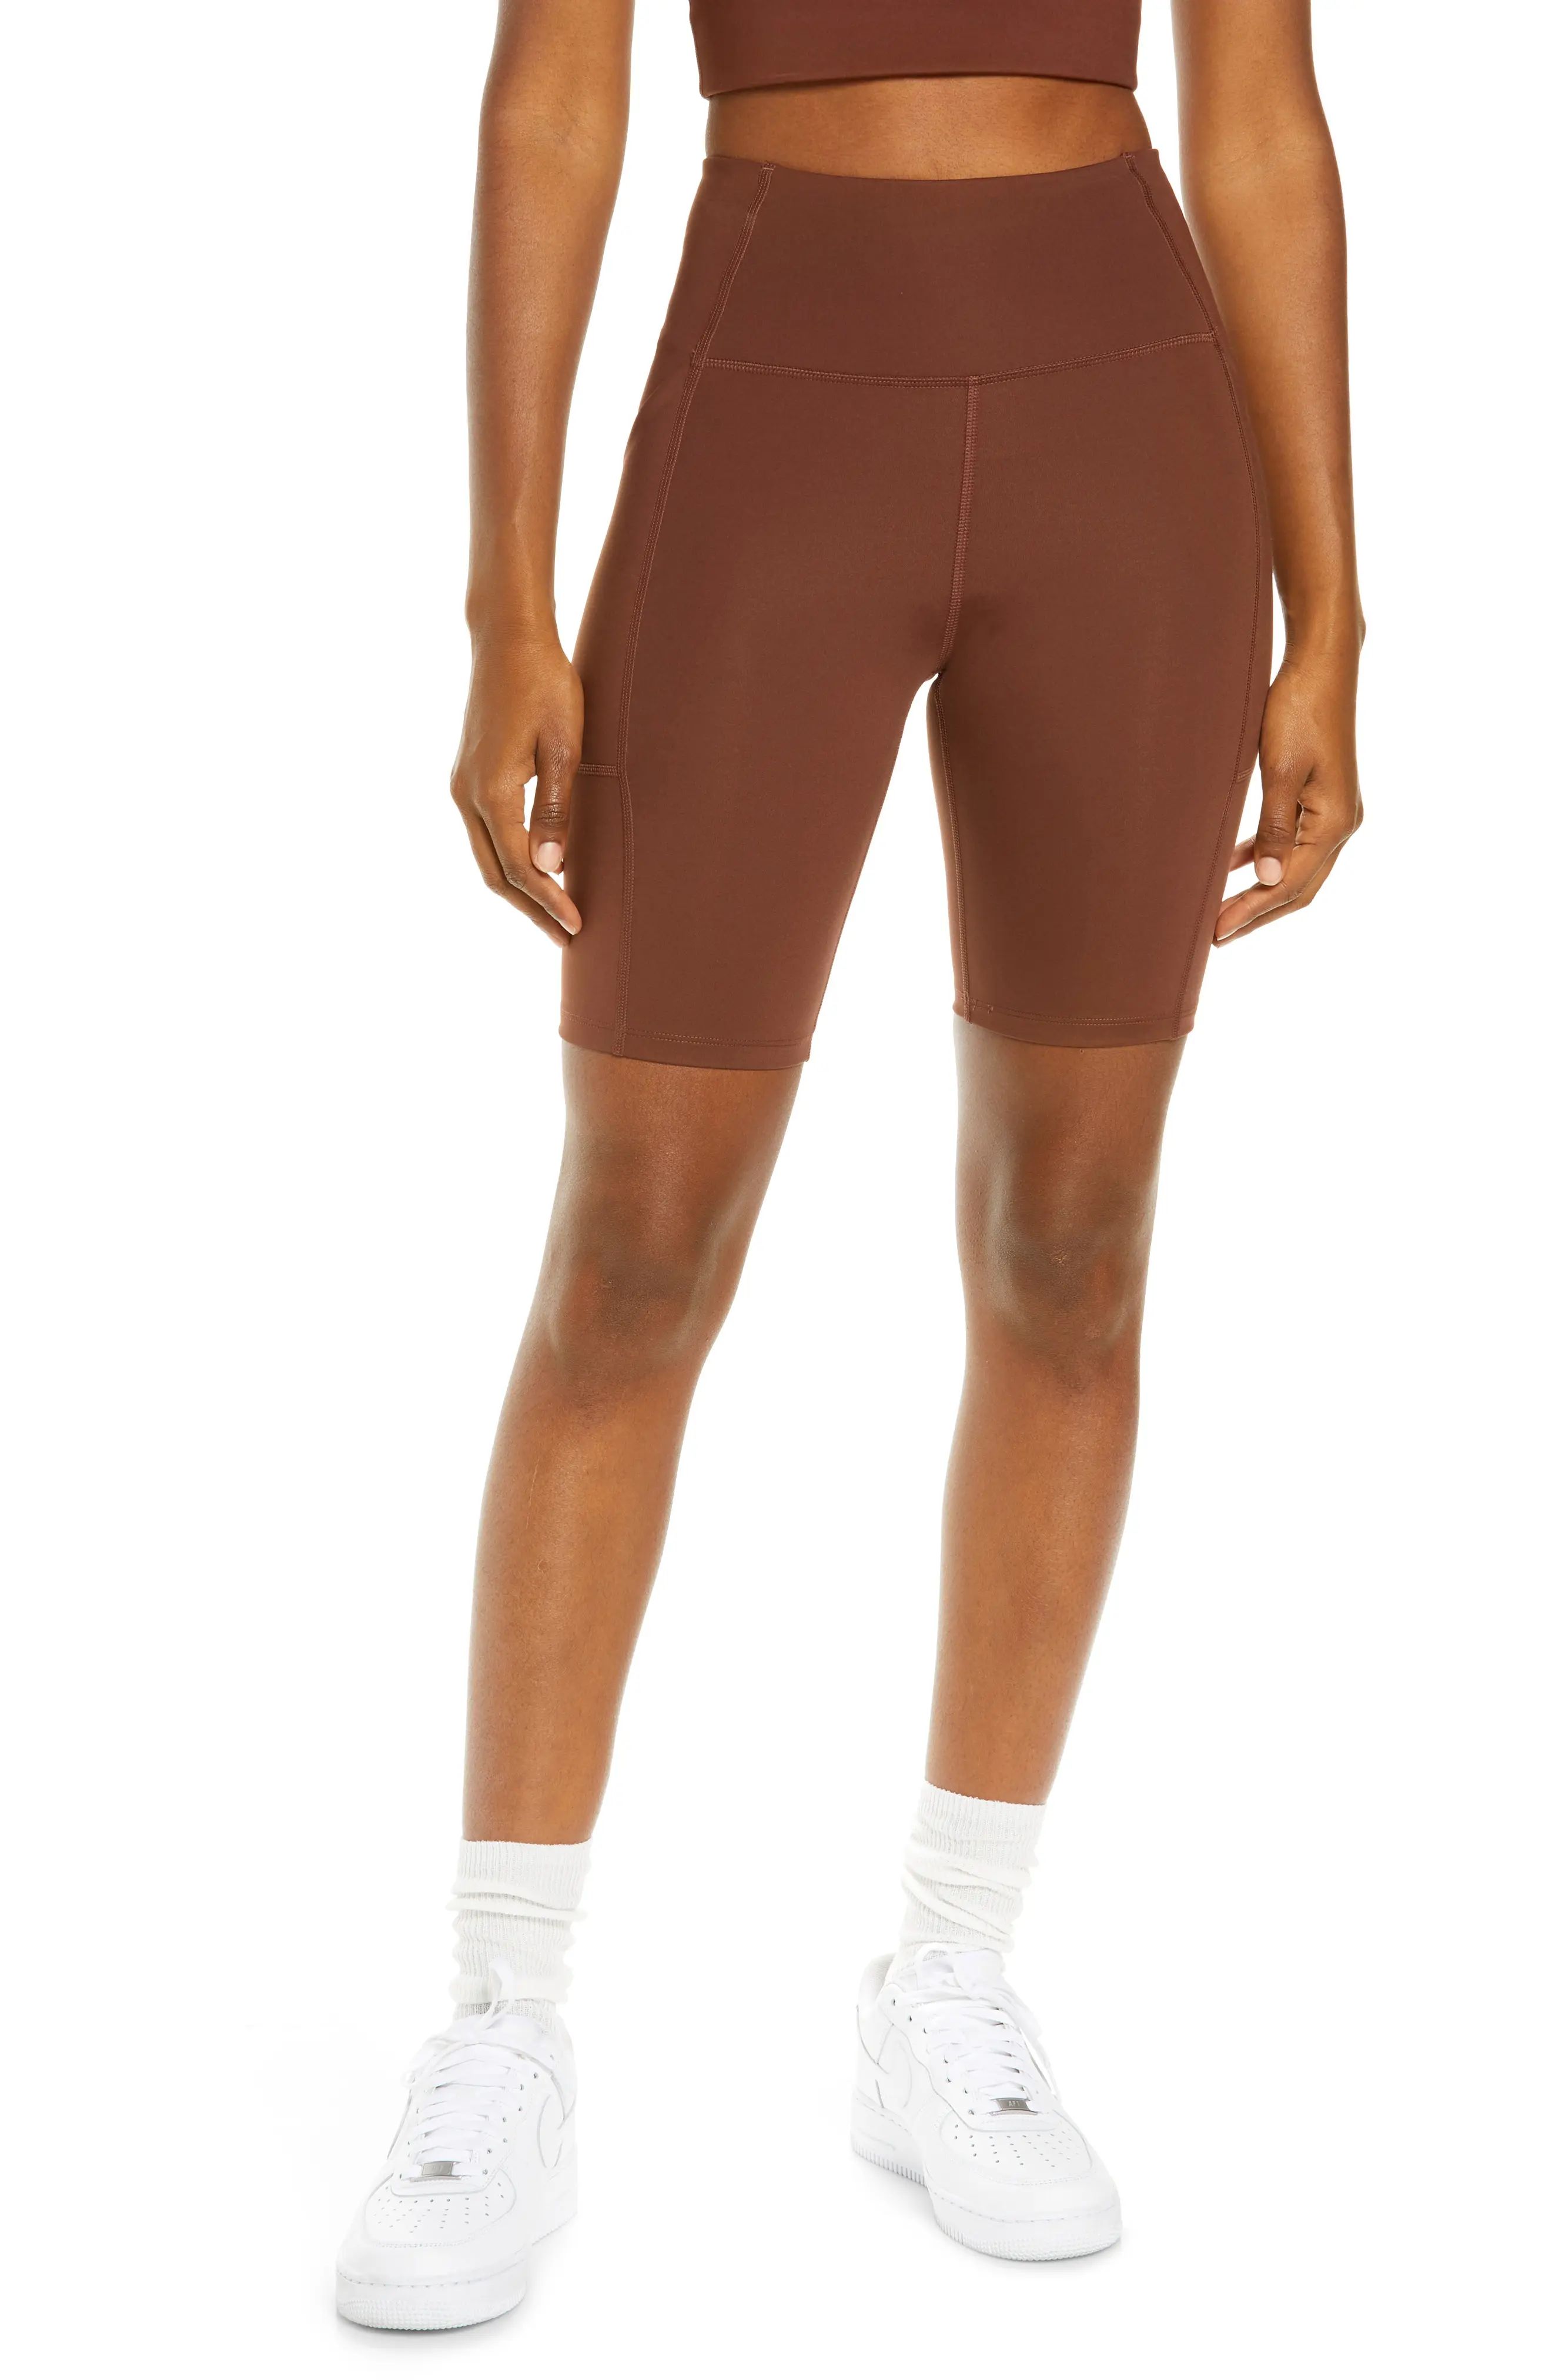 Girlfriend Collective High Rise Pocket Bike Shorts, Size X-Small in Earth at Nordstrom | Nordstrom